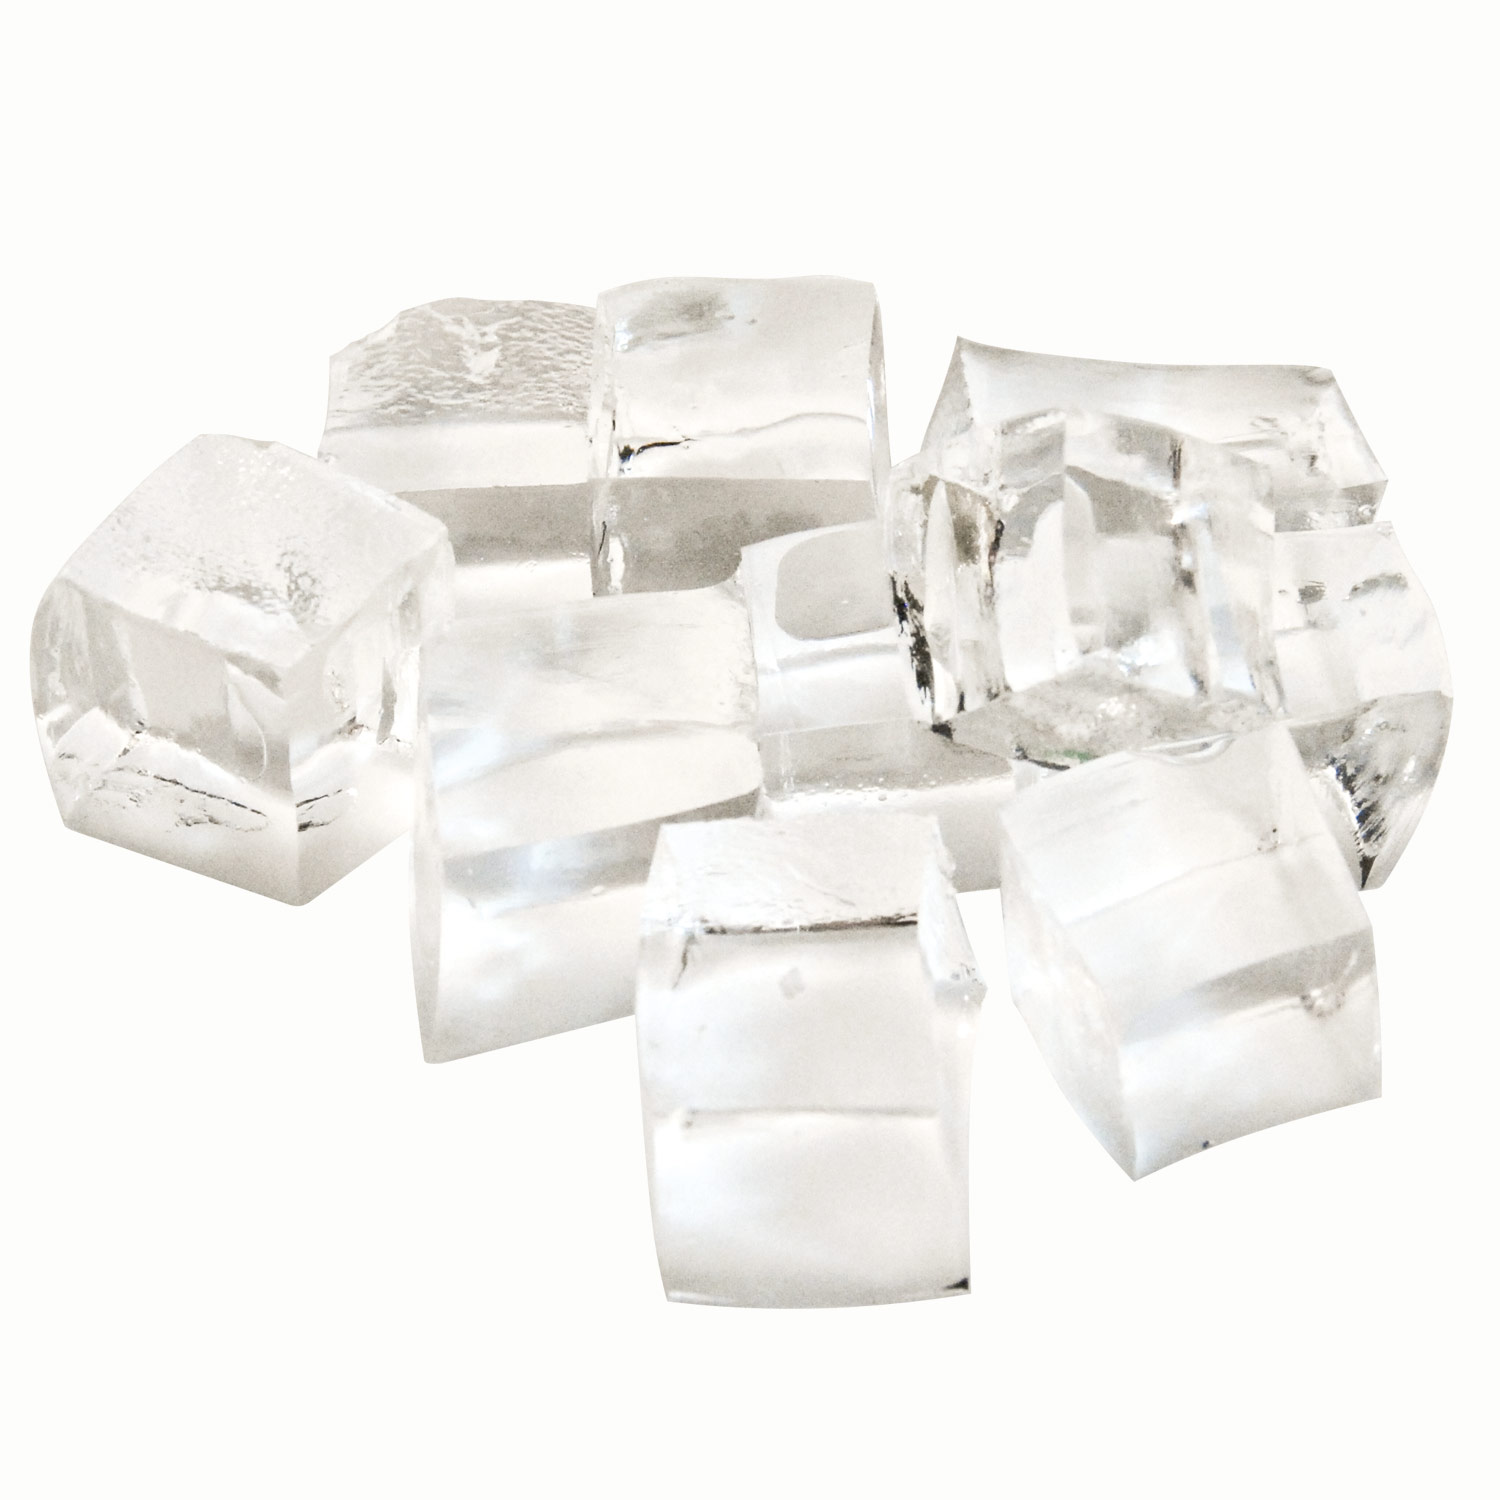 Water Cubes - Superabsorbent Polymers